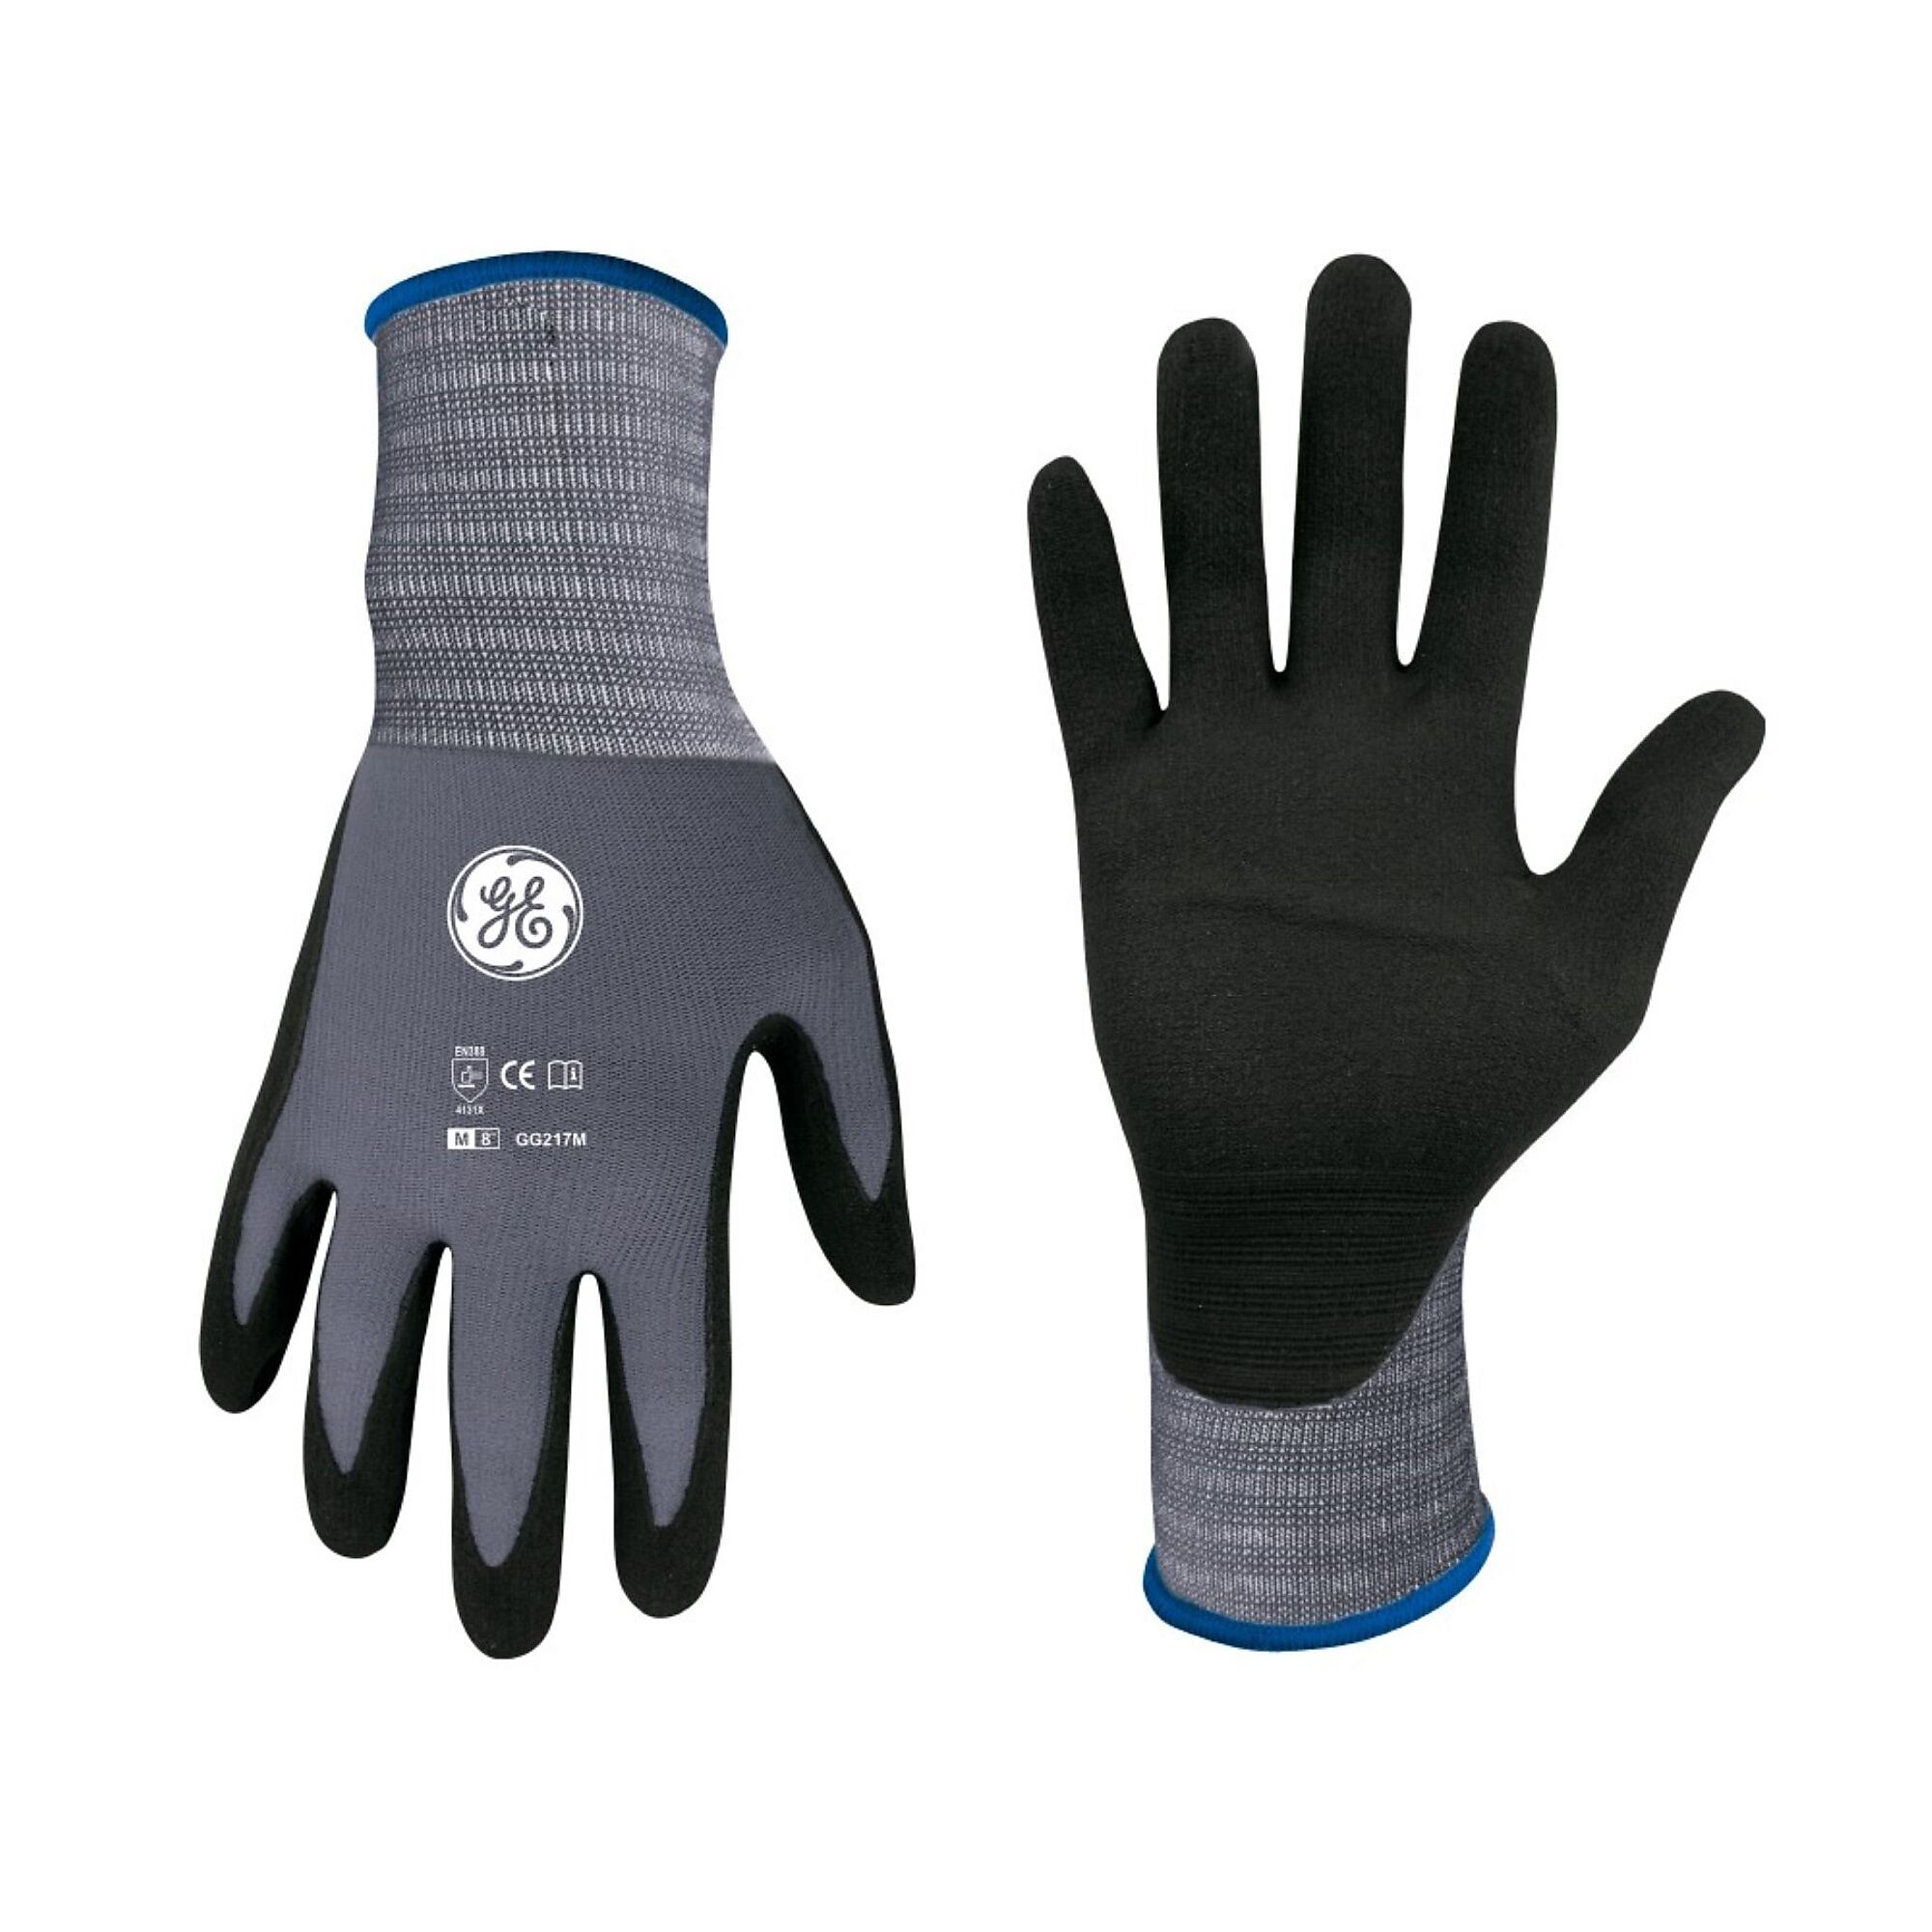 General Electric, Unisex Dipped Gloves Black/Gray M 1 pair, Size M, Included (qty.) 12, Model GG217M